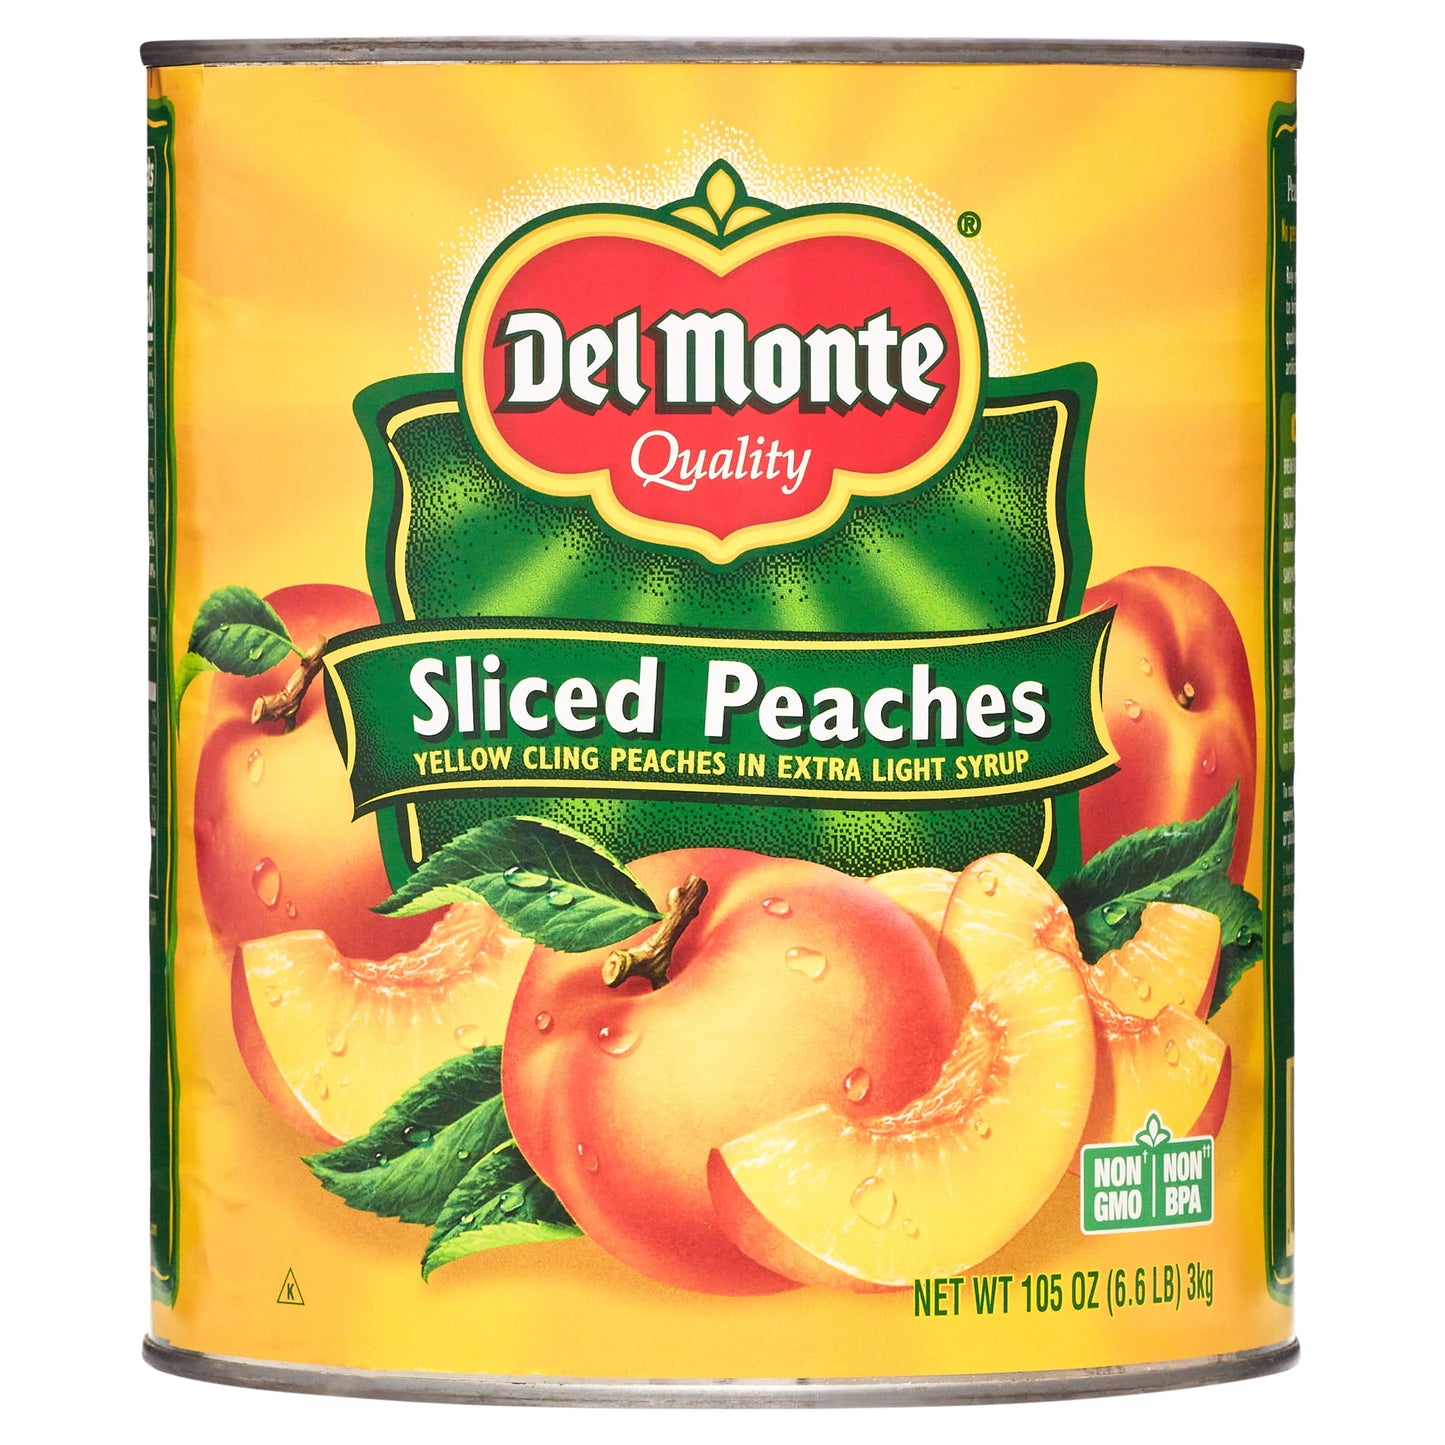 Sliced Peaches, Extra Light Syrup, Canned Fruit, 105 Oz Can